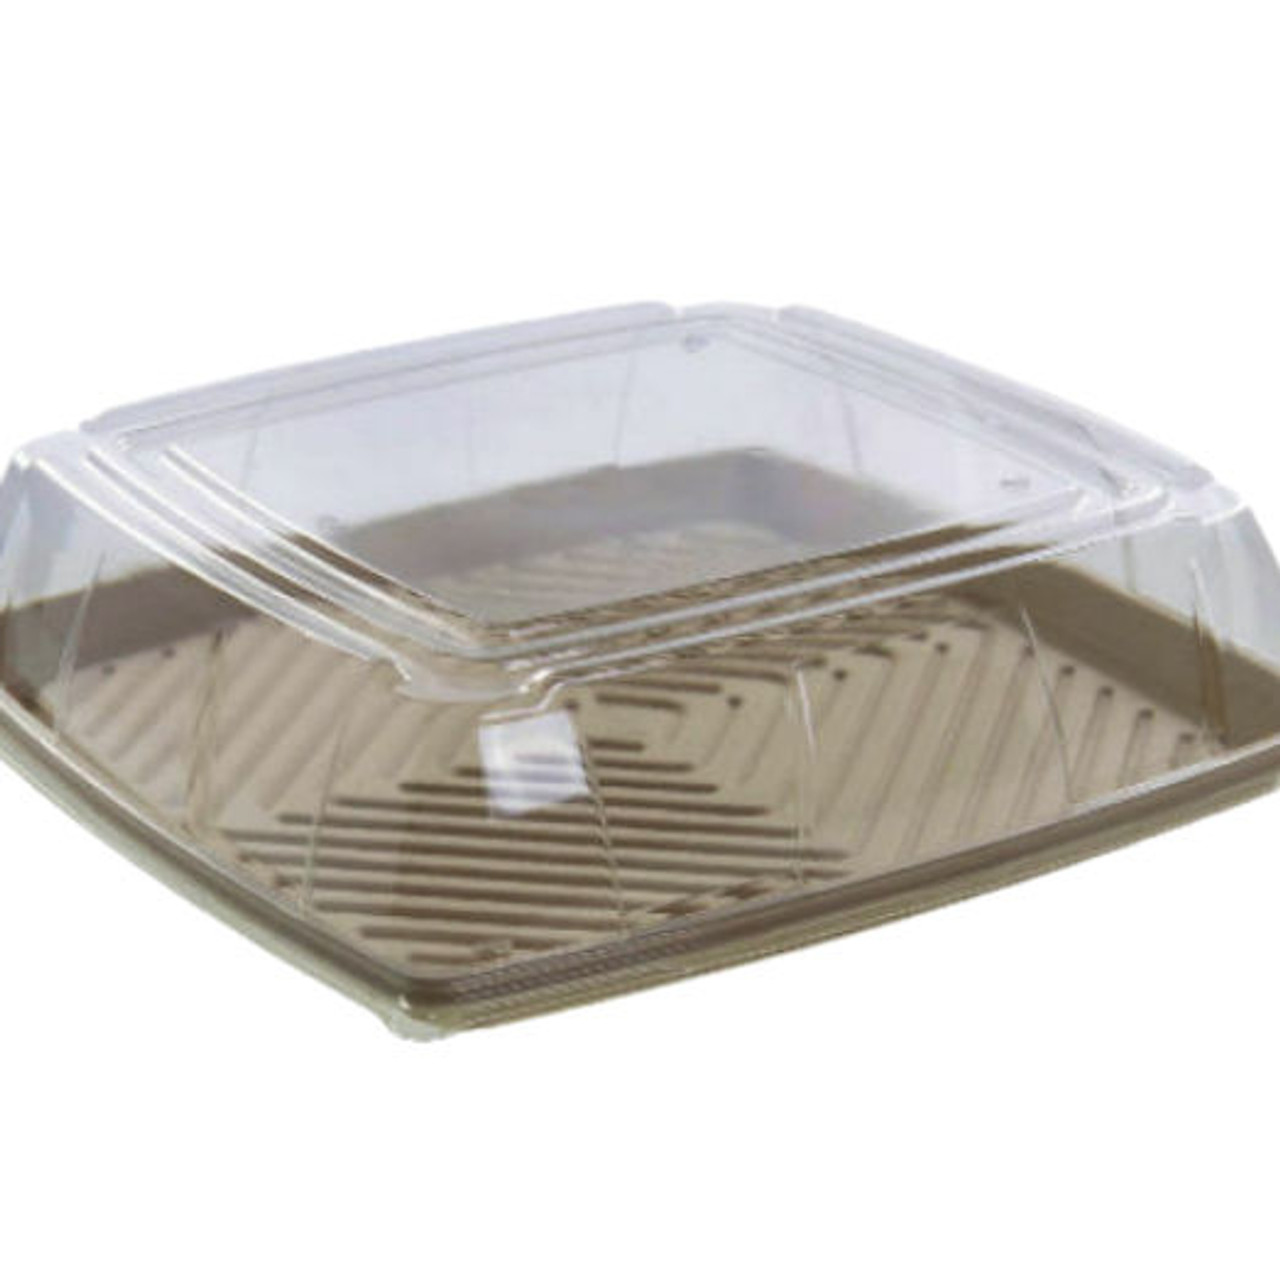 Extra Large 16" Sabert Square Pulp Platter and Clear Lid ( 400 x 400 x 80mm ) Pack x 5